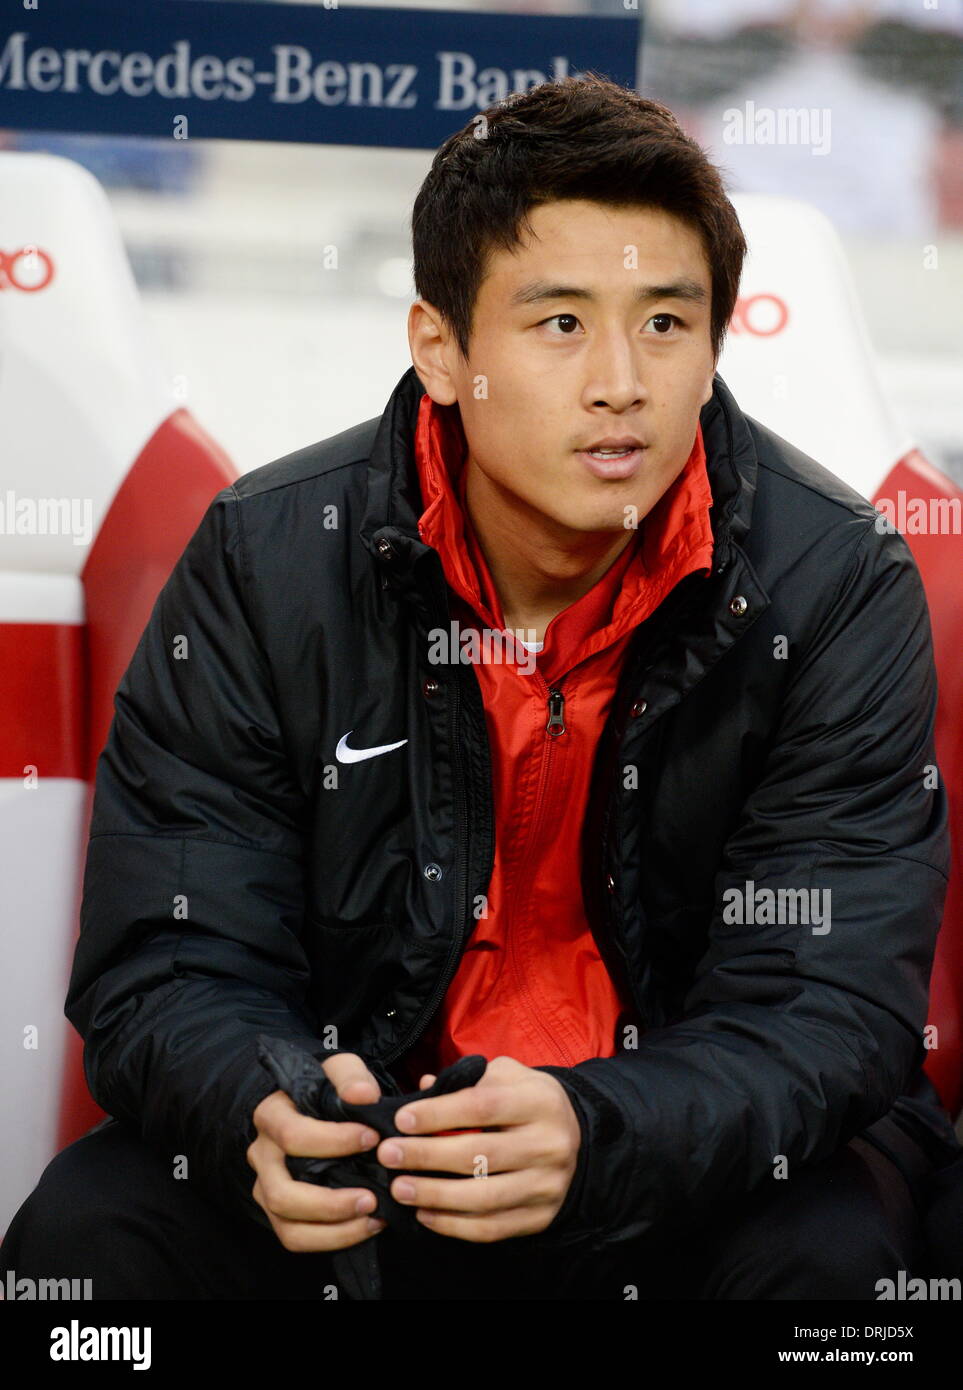 Stuttgart, Germany. 25th Jan, 2014. Mainz's new acquisition Ja-Cheol Koo sits on the substitutes' bench before the Bundesliga soccer match between VfB Stuttgart and 1. FSV Mainz 05 at Mercedes-Benz Arena in Stuttgart, Germany, 25 January 2014. Photo: BERND WEISSBROD/DPA/Alamy Live News Stock Photo